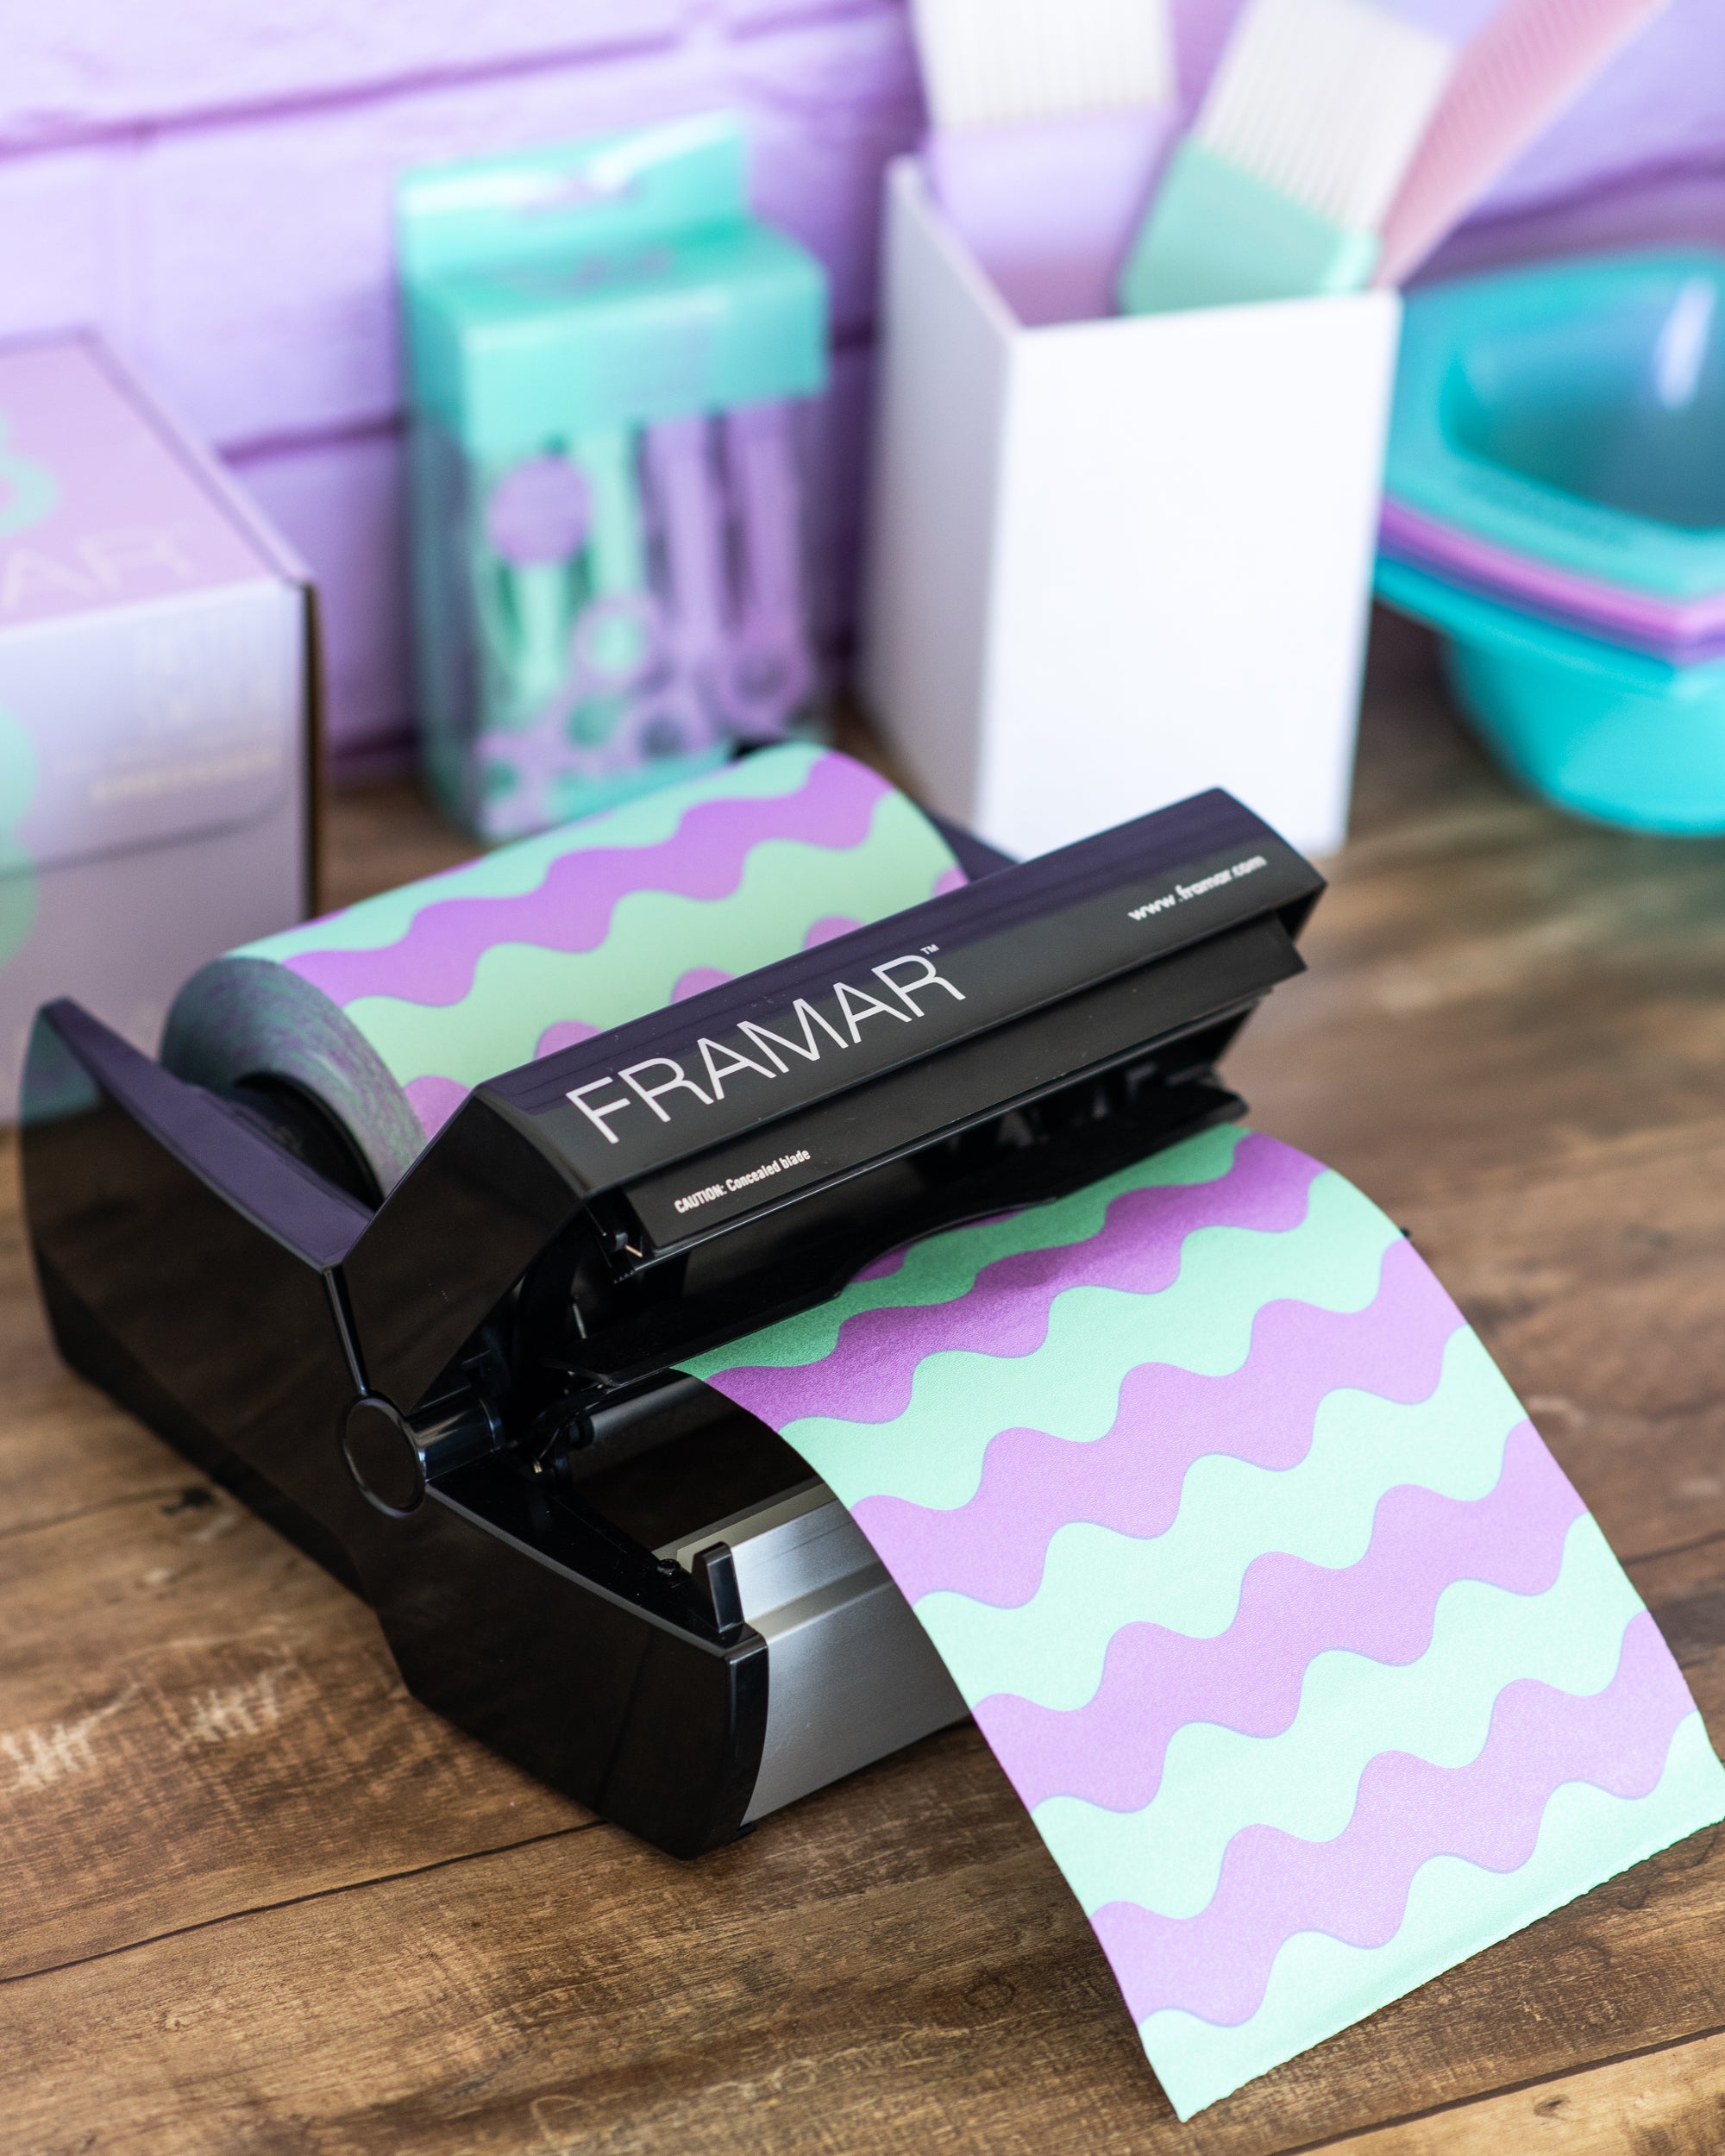 Framar Embossed Foil - Pastel Switch (Medium) - Small Roll - Creata Beauty - Professional Beauty Products